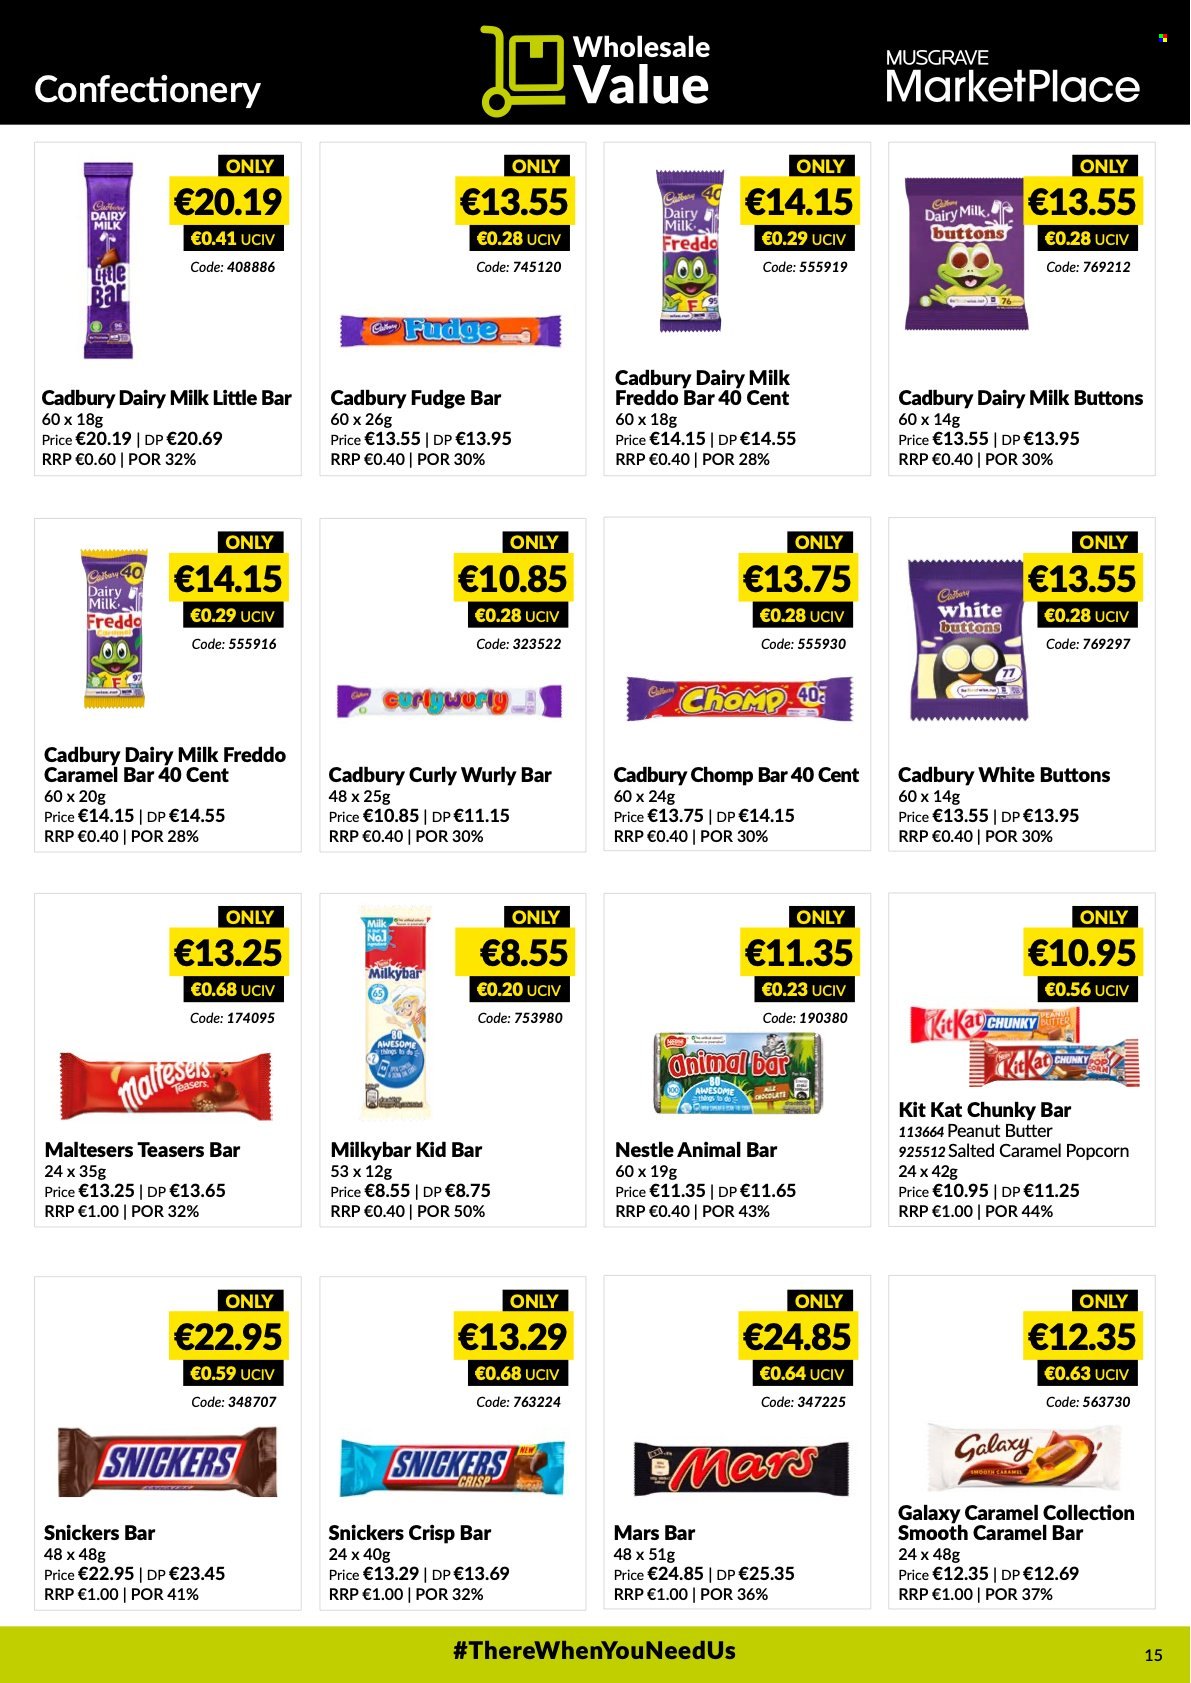 thumbnail - MUSGRAVE Market Place offer  - 16.01.2022 - 12.02.2022 - Sales products - fudge, Nestlé, Snickers, Mars, KitKat, Maltesers, Cadbury, milky bar, Dairy Milk, popcorn, peanut butter. Page 15.